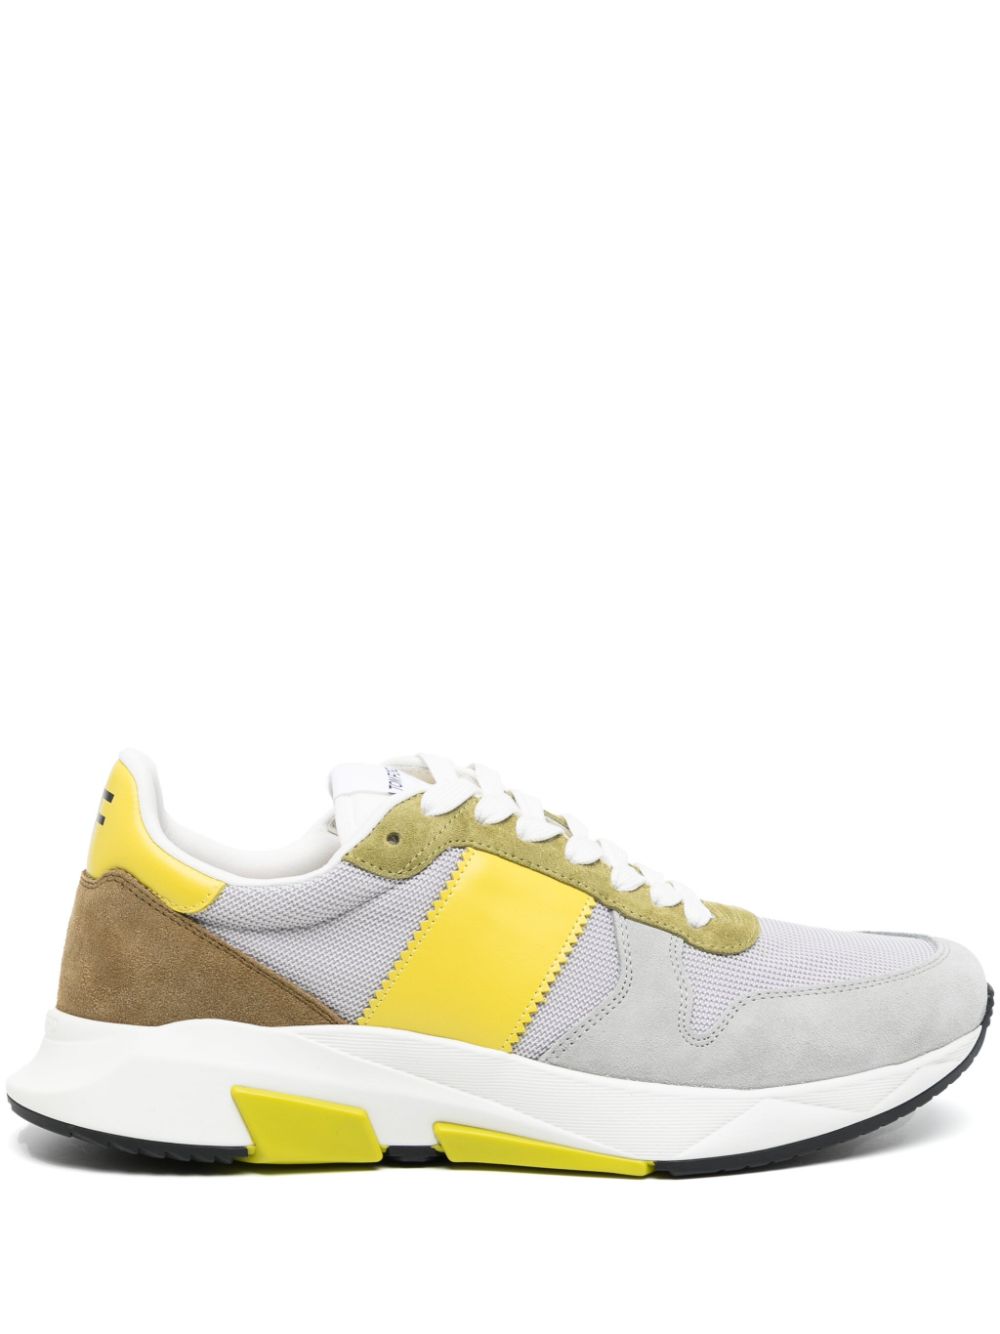 TOM FORD Jagga panelled sneakers - Grey von TOM FORD